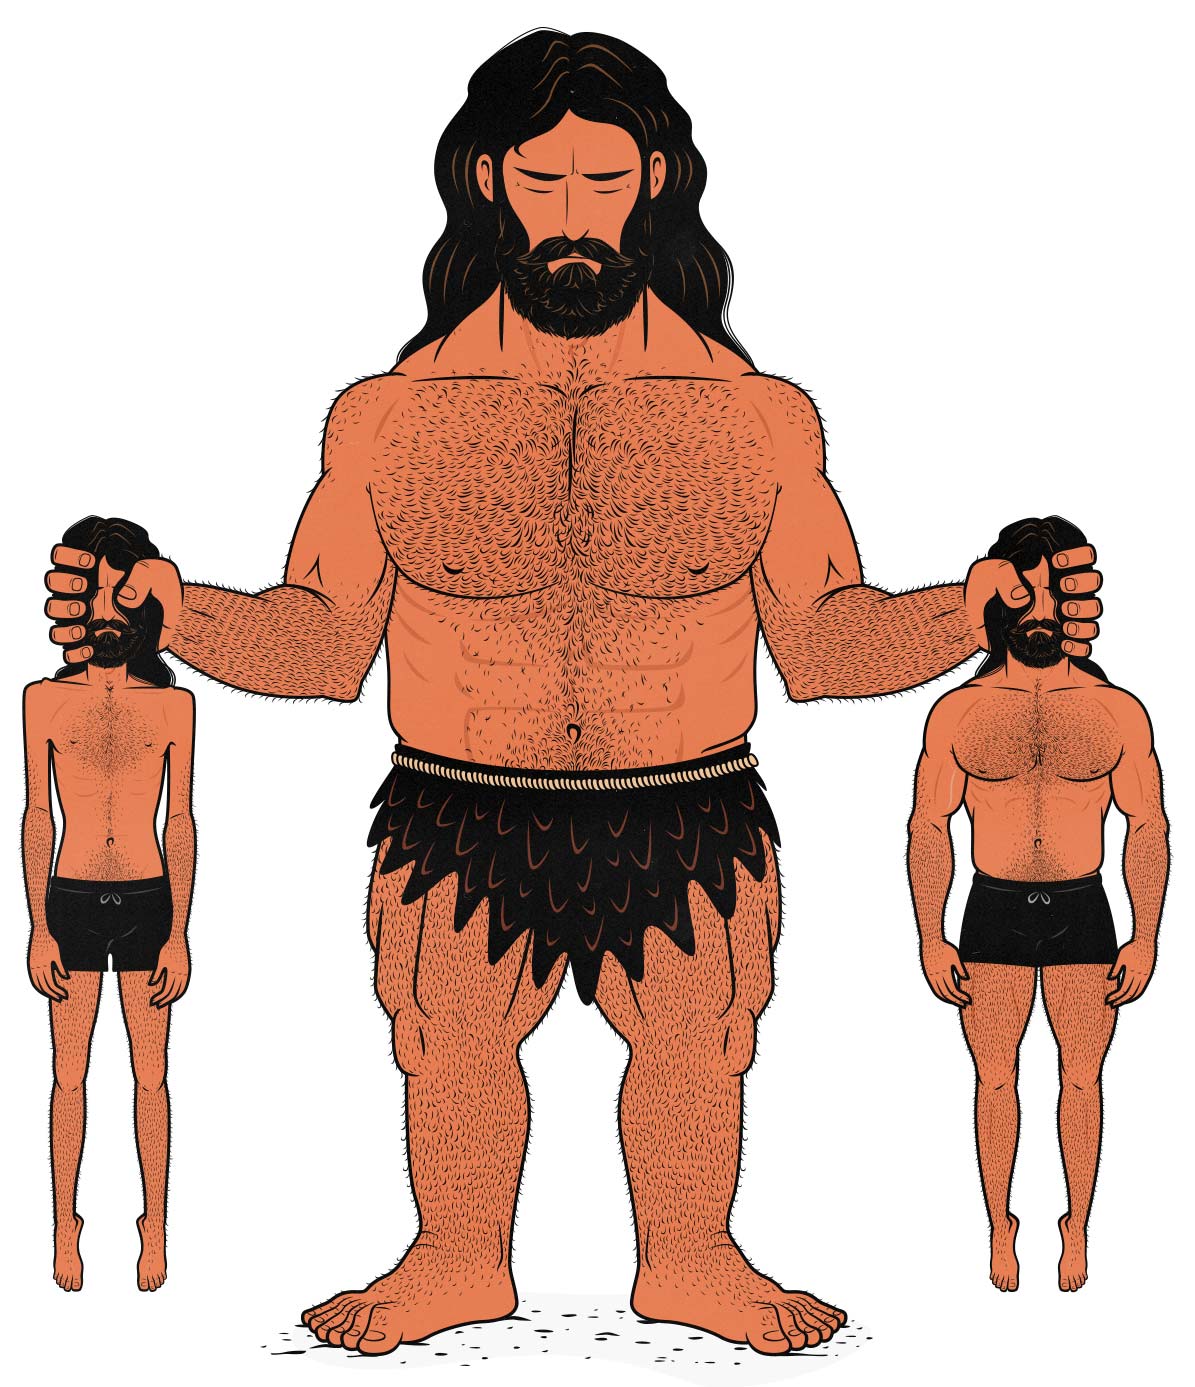 Illustration showing a skinny guy bulking up and becoming muscular, assisted by the giant Bamba.